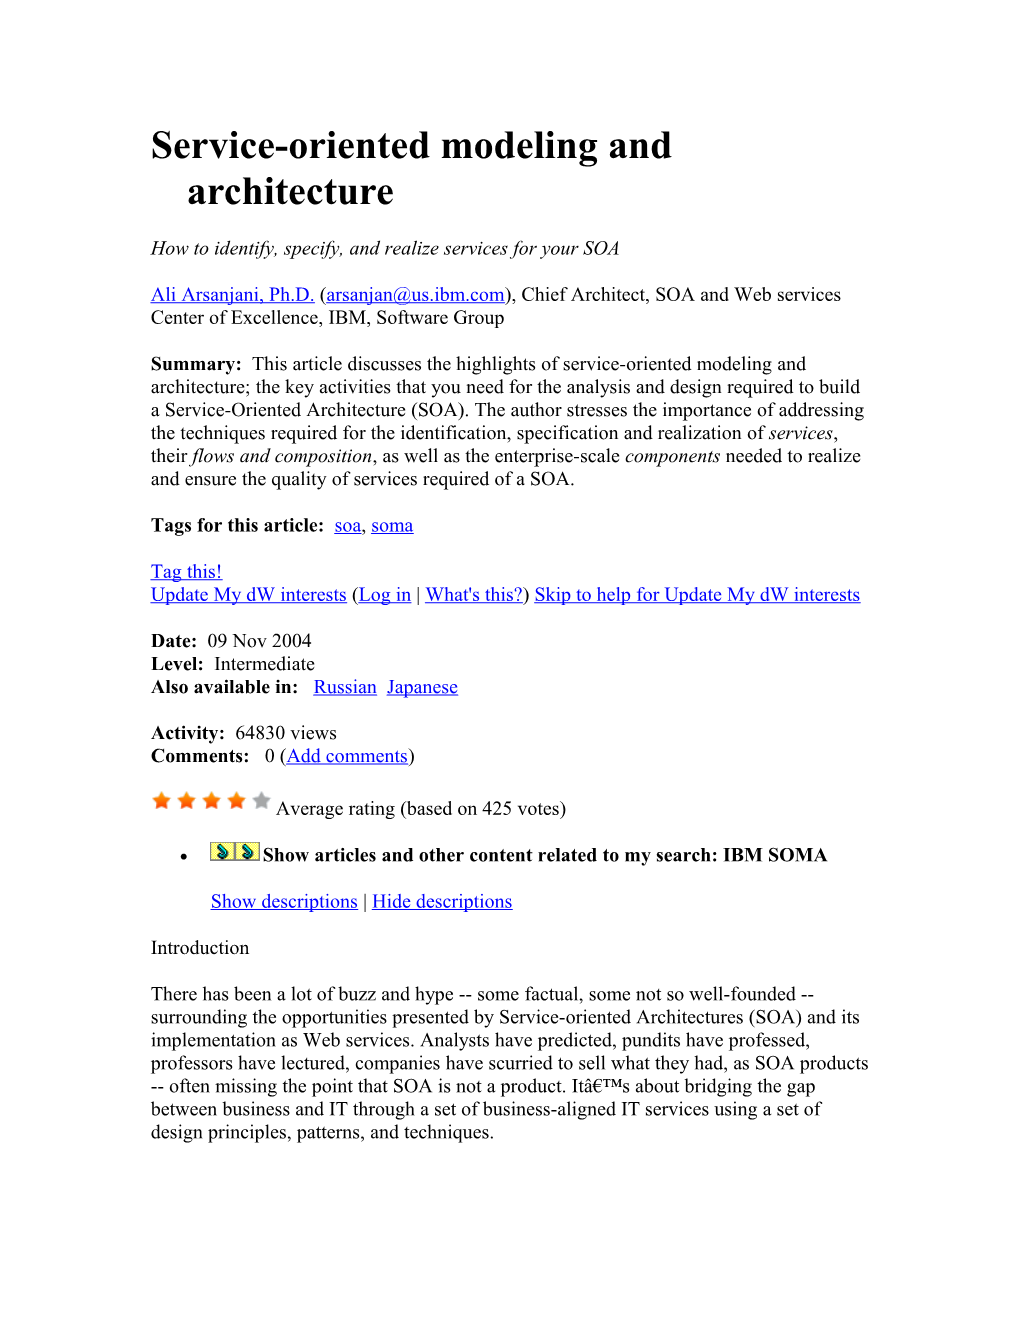 Service-Oriented Modeling and Architecture